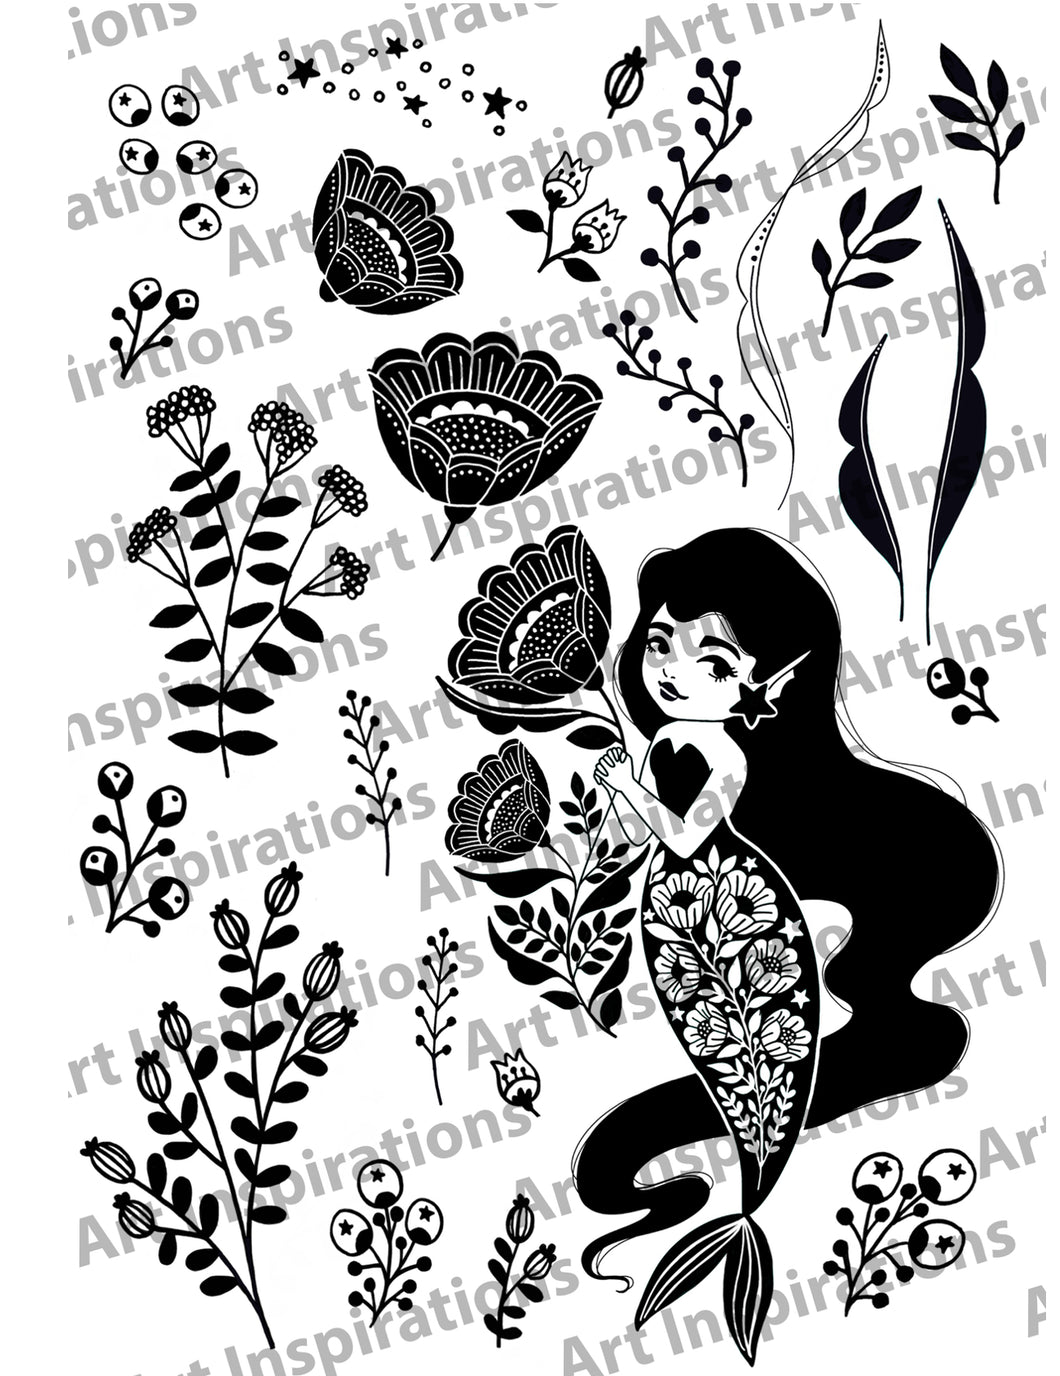 Art Inspirations by Wensdi Made A5 Clear Stamp Sheet - Under The Sea Betty - 26 Stamps